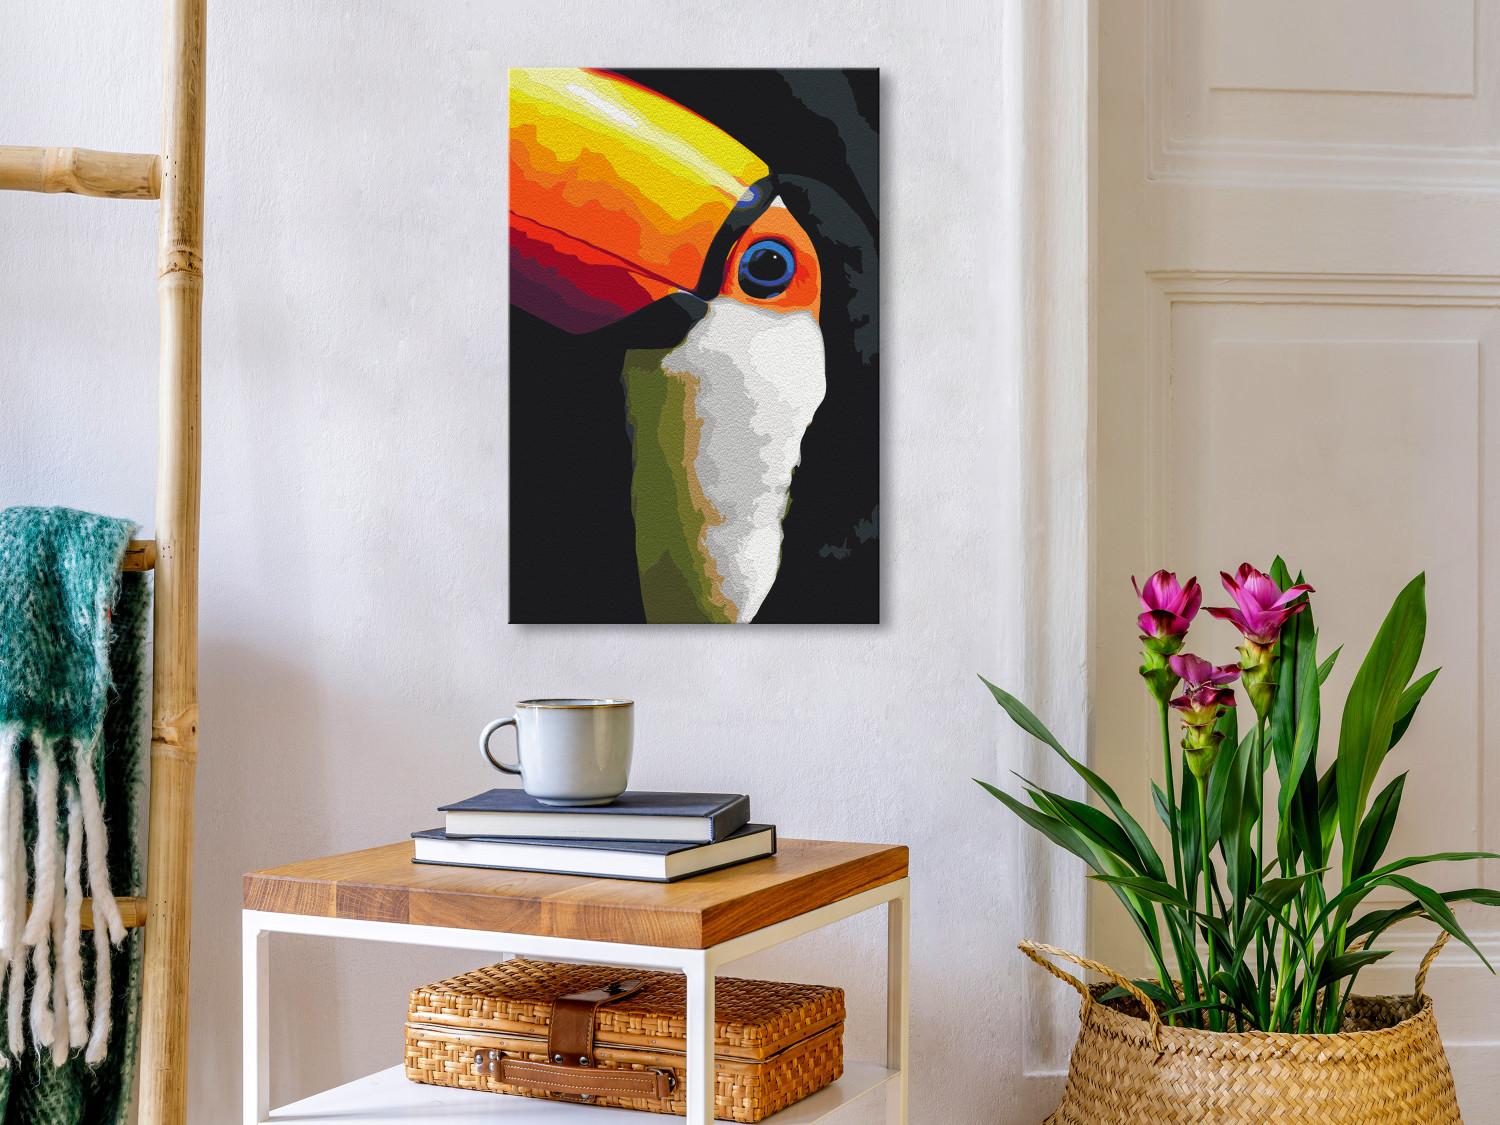 Paint by Number Kit Toucan